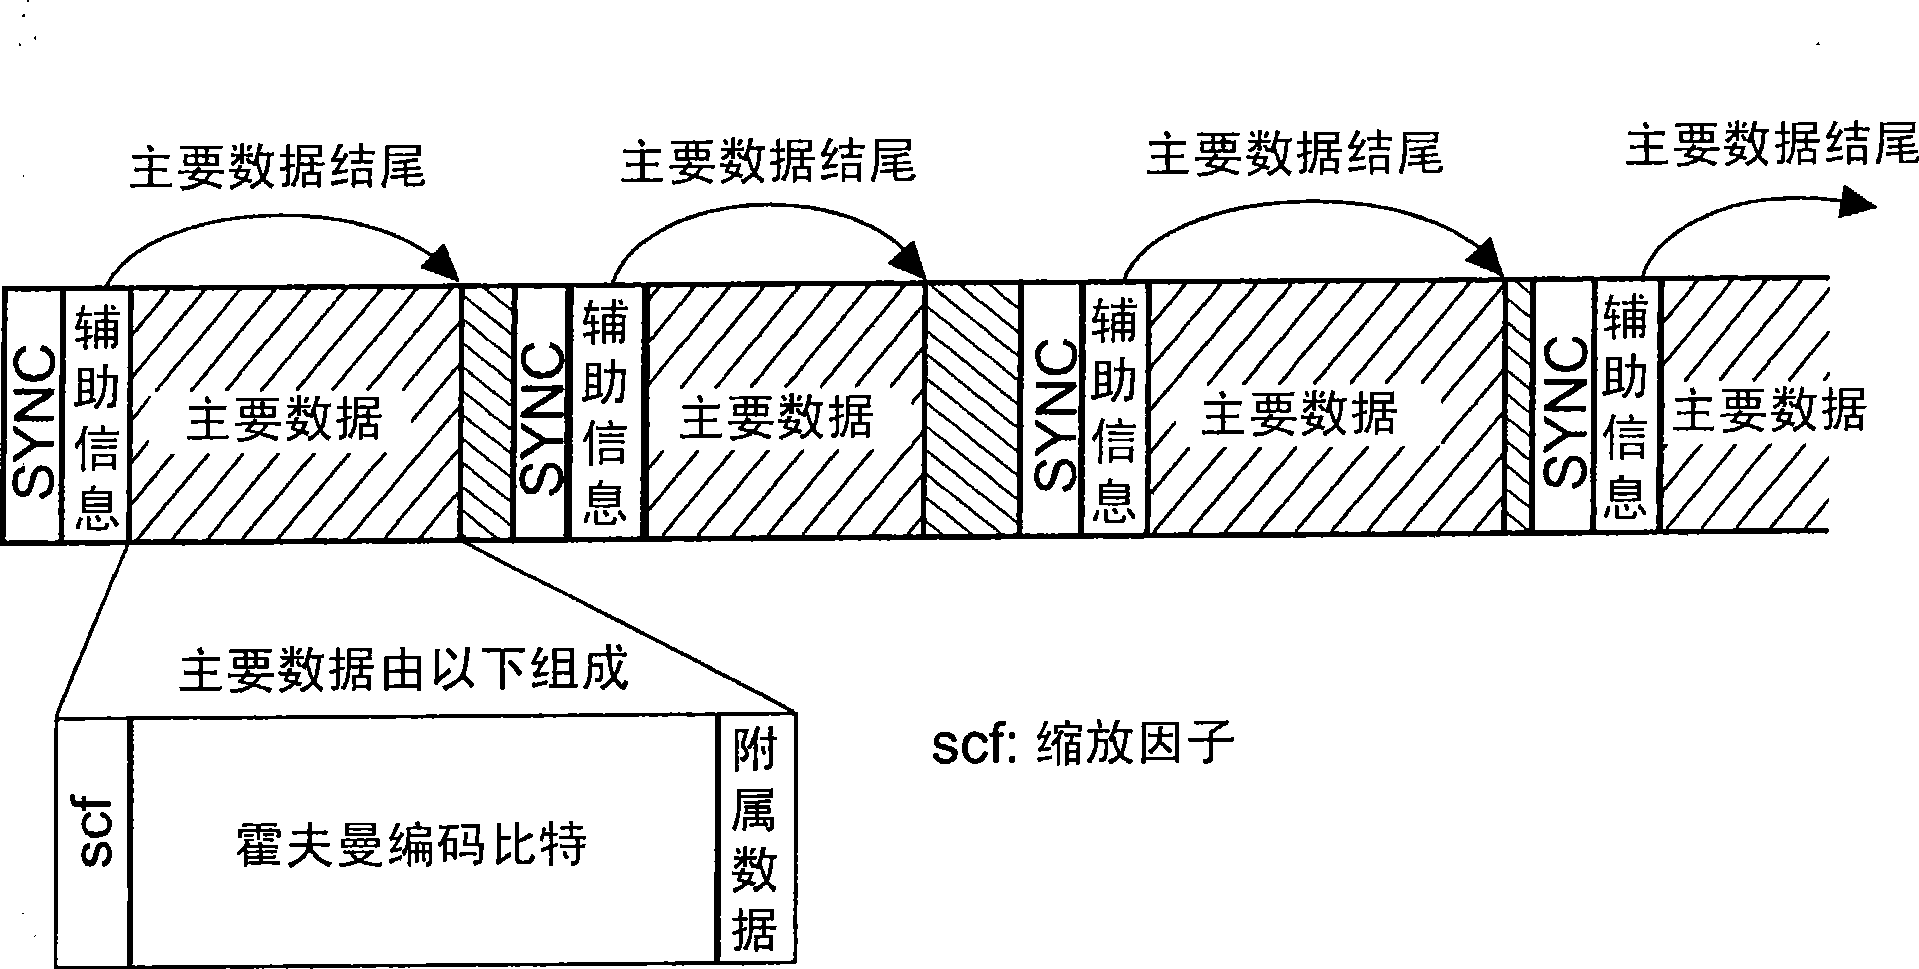 Audio bitstream data structure arrangement of a lossy encoded signal together with lossless encoded extension data for said signal